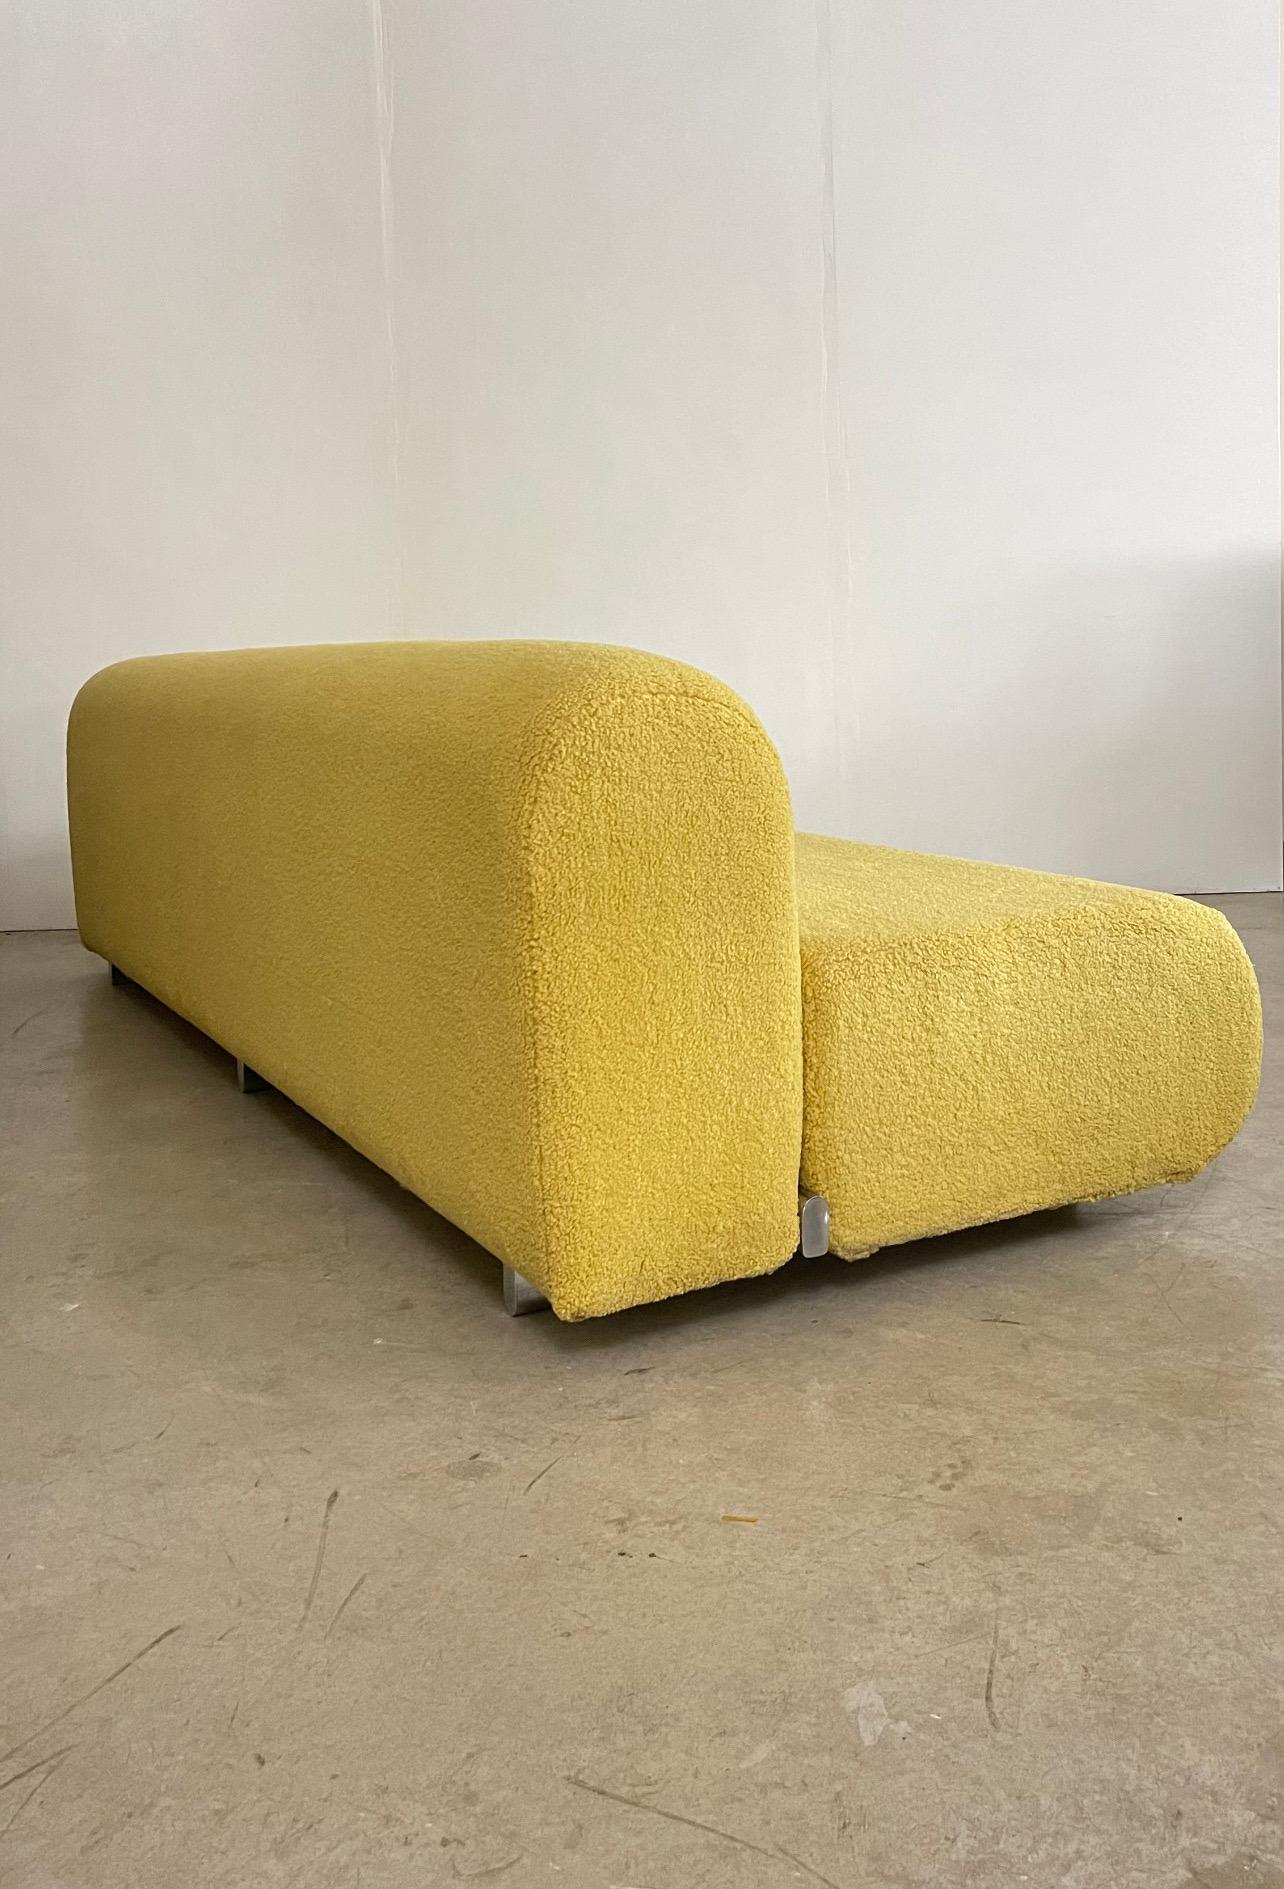 This gorgeous Knoll Suzanne sofa is a true statement piece. Originally designed by Kazuhide Takahama for Knoll in the mid-20th century, the Suzanne sofa has become an iconic piece of furniture known for its sleek lines and minimalist design. This